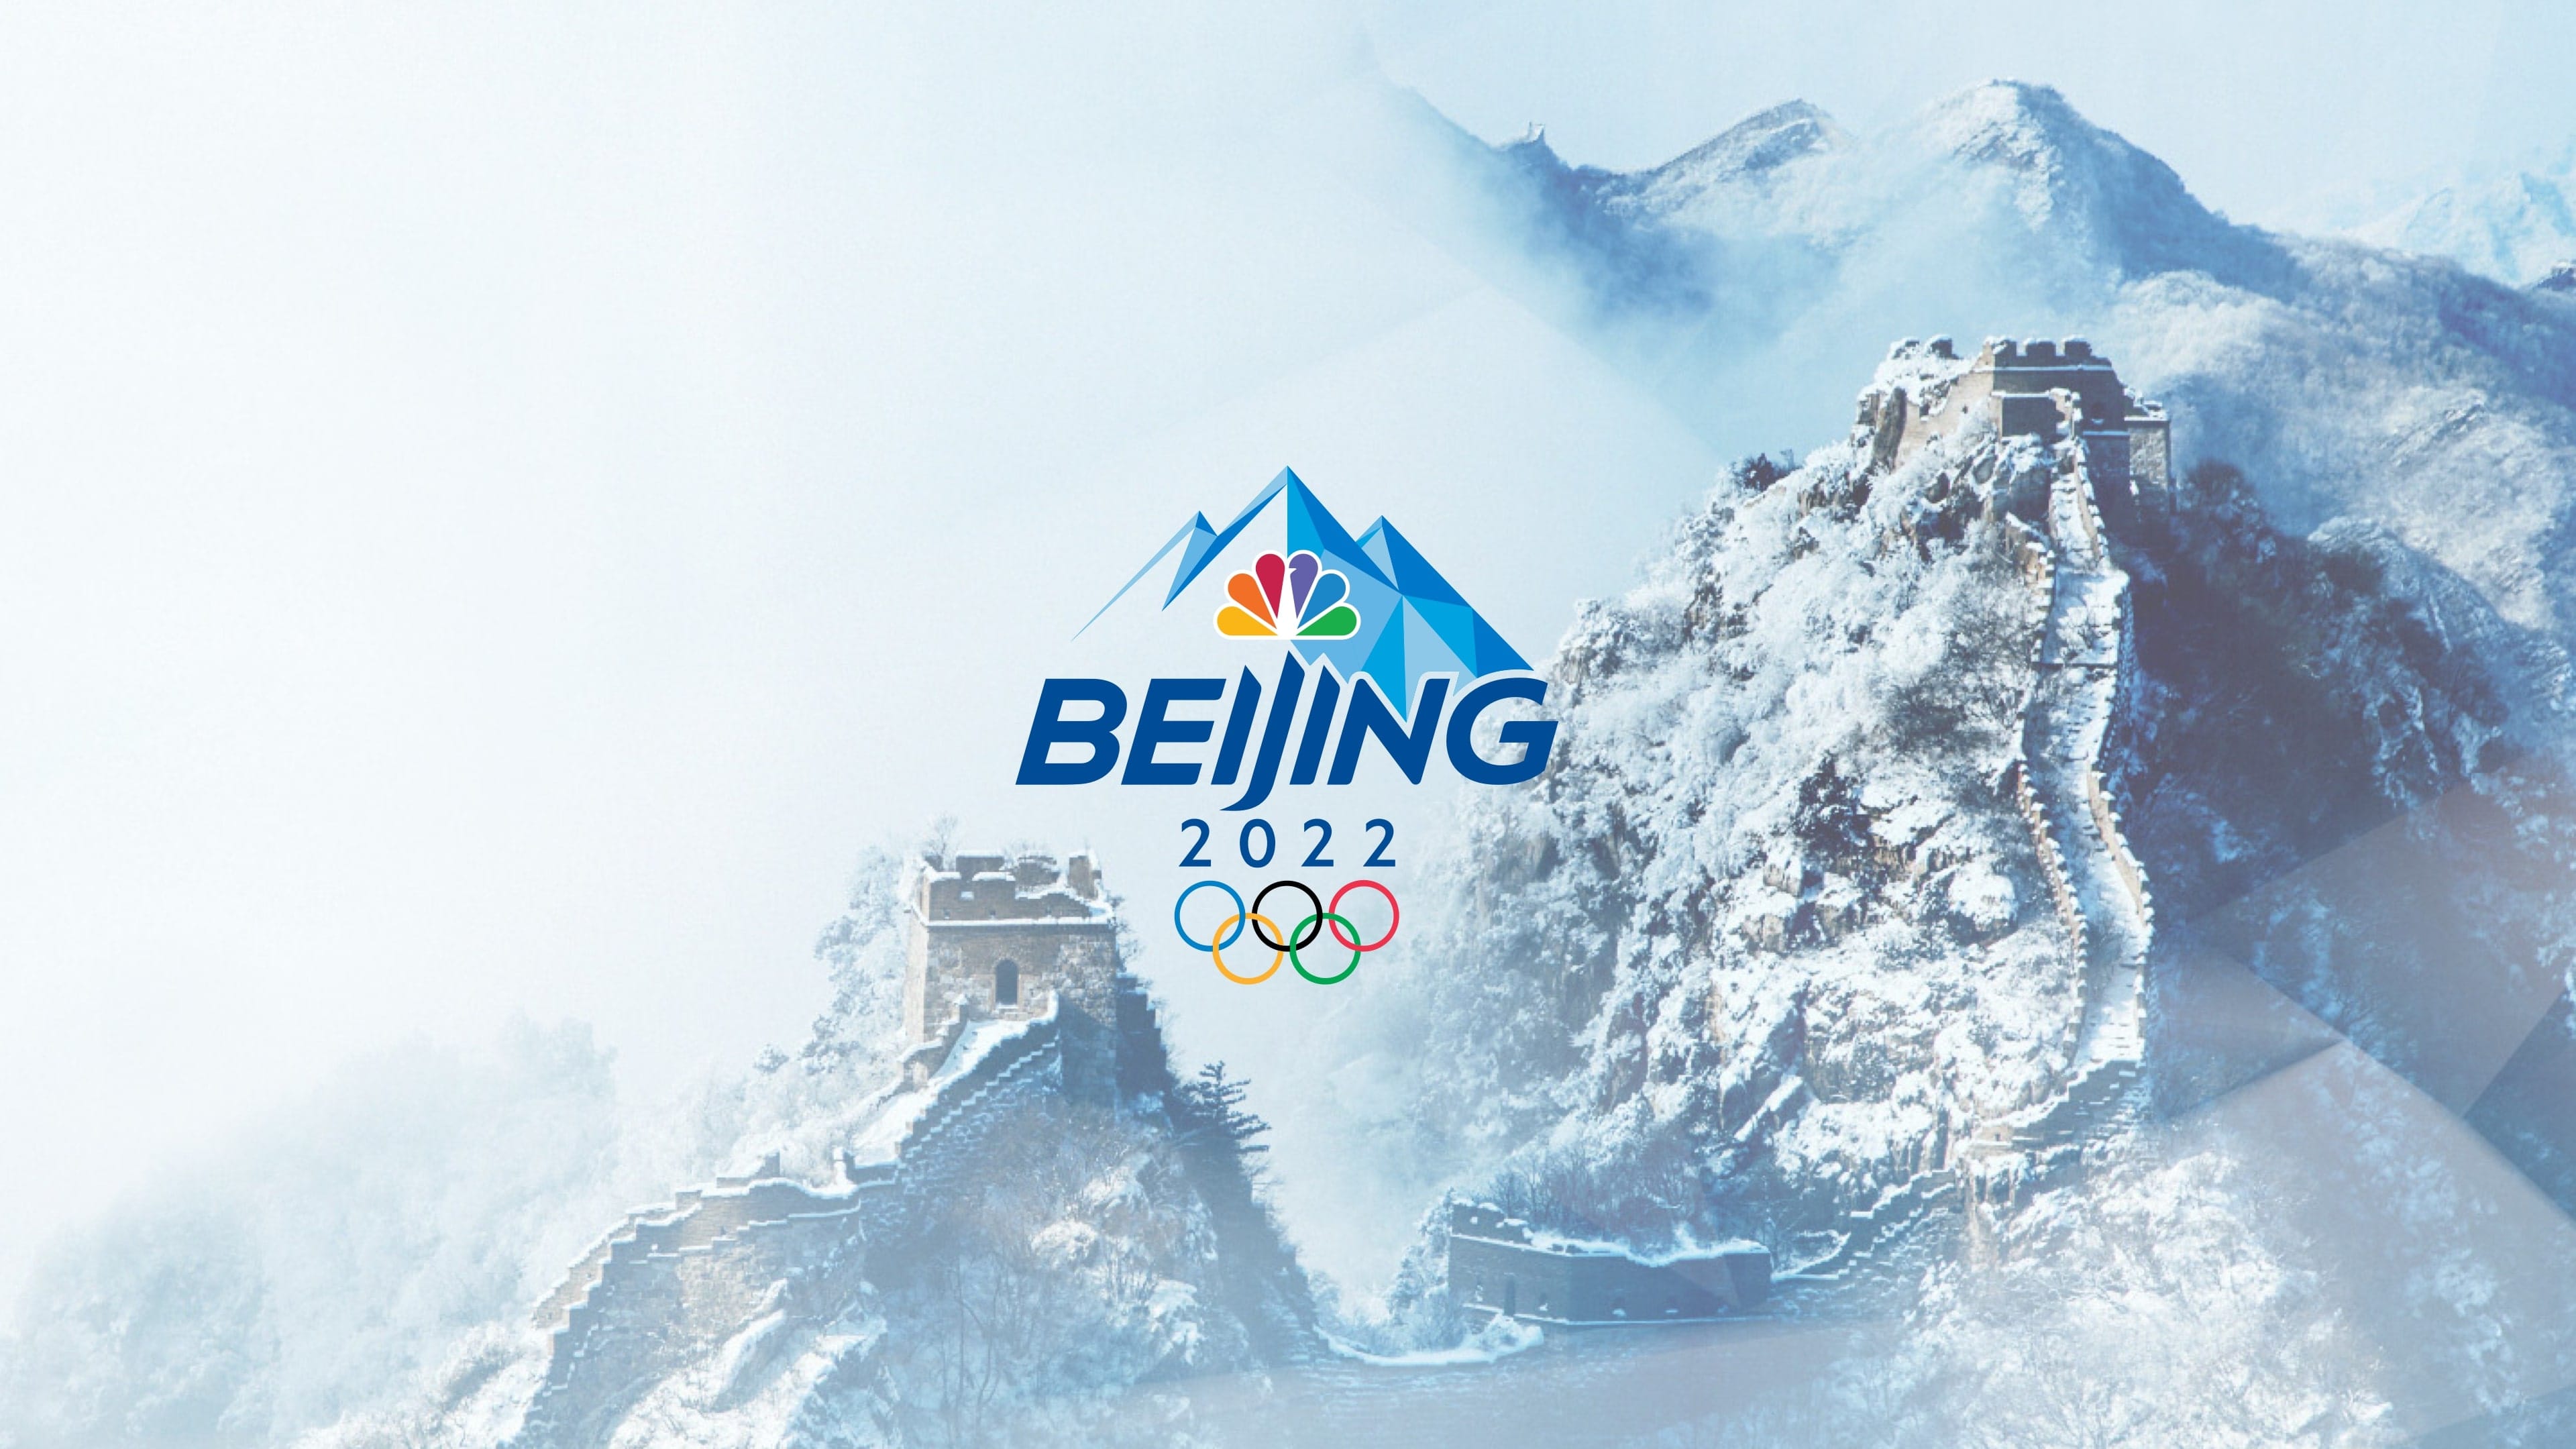 Everything to know about the 2022 Winter Olympics